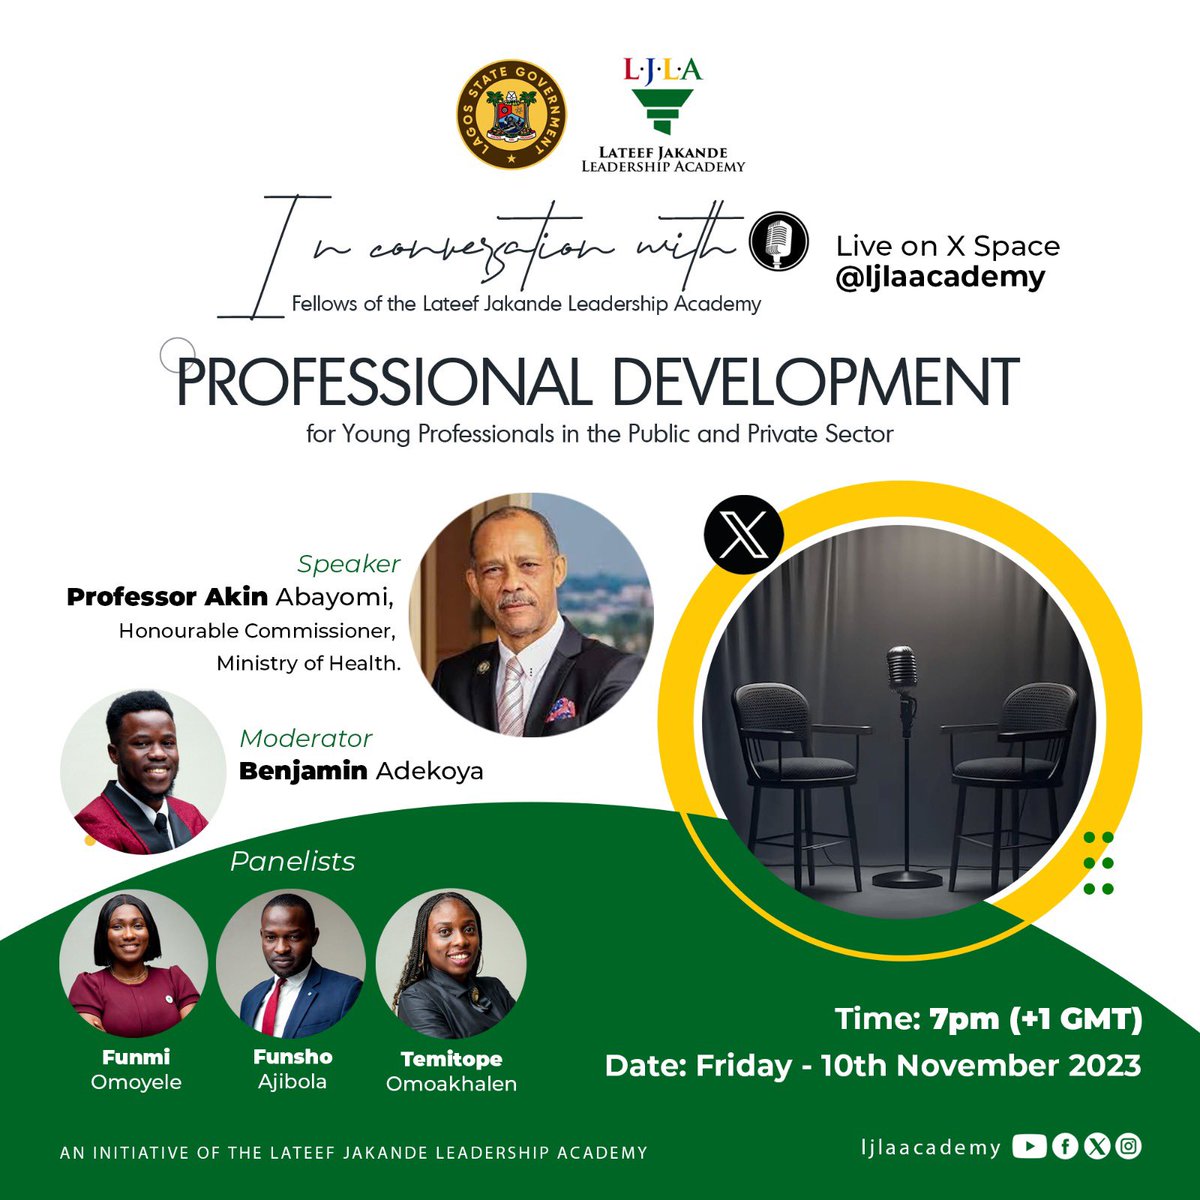 Exciting news! Join us on another insightful X Space session #InConversationWith Professor Akin Abayomi.@ProfAkinAbayomi 

Professor Abayomi is the Honourable Commissioner for Health and is currently serving his second term. 

In this conversation, we will be giving light on how